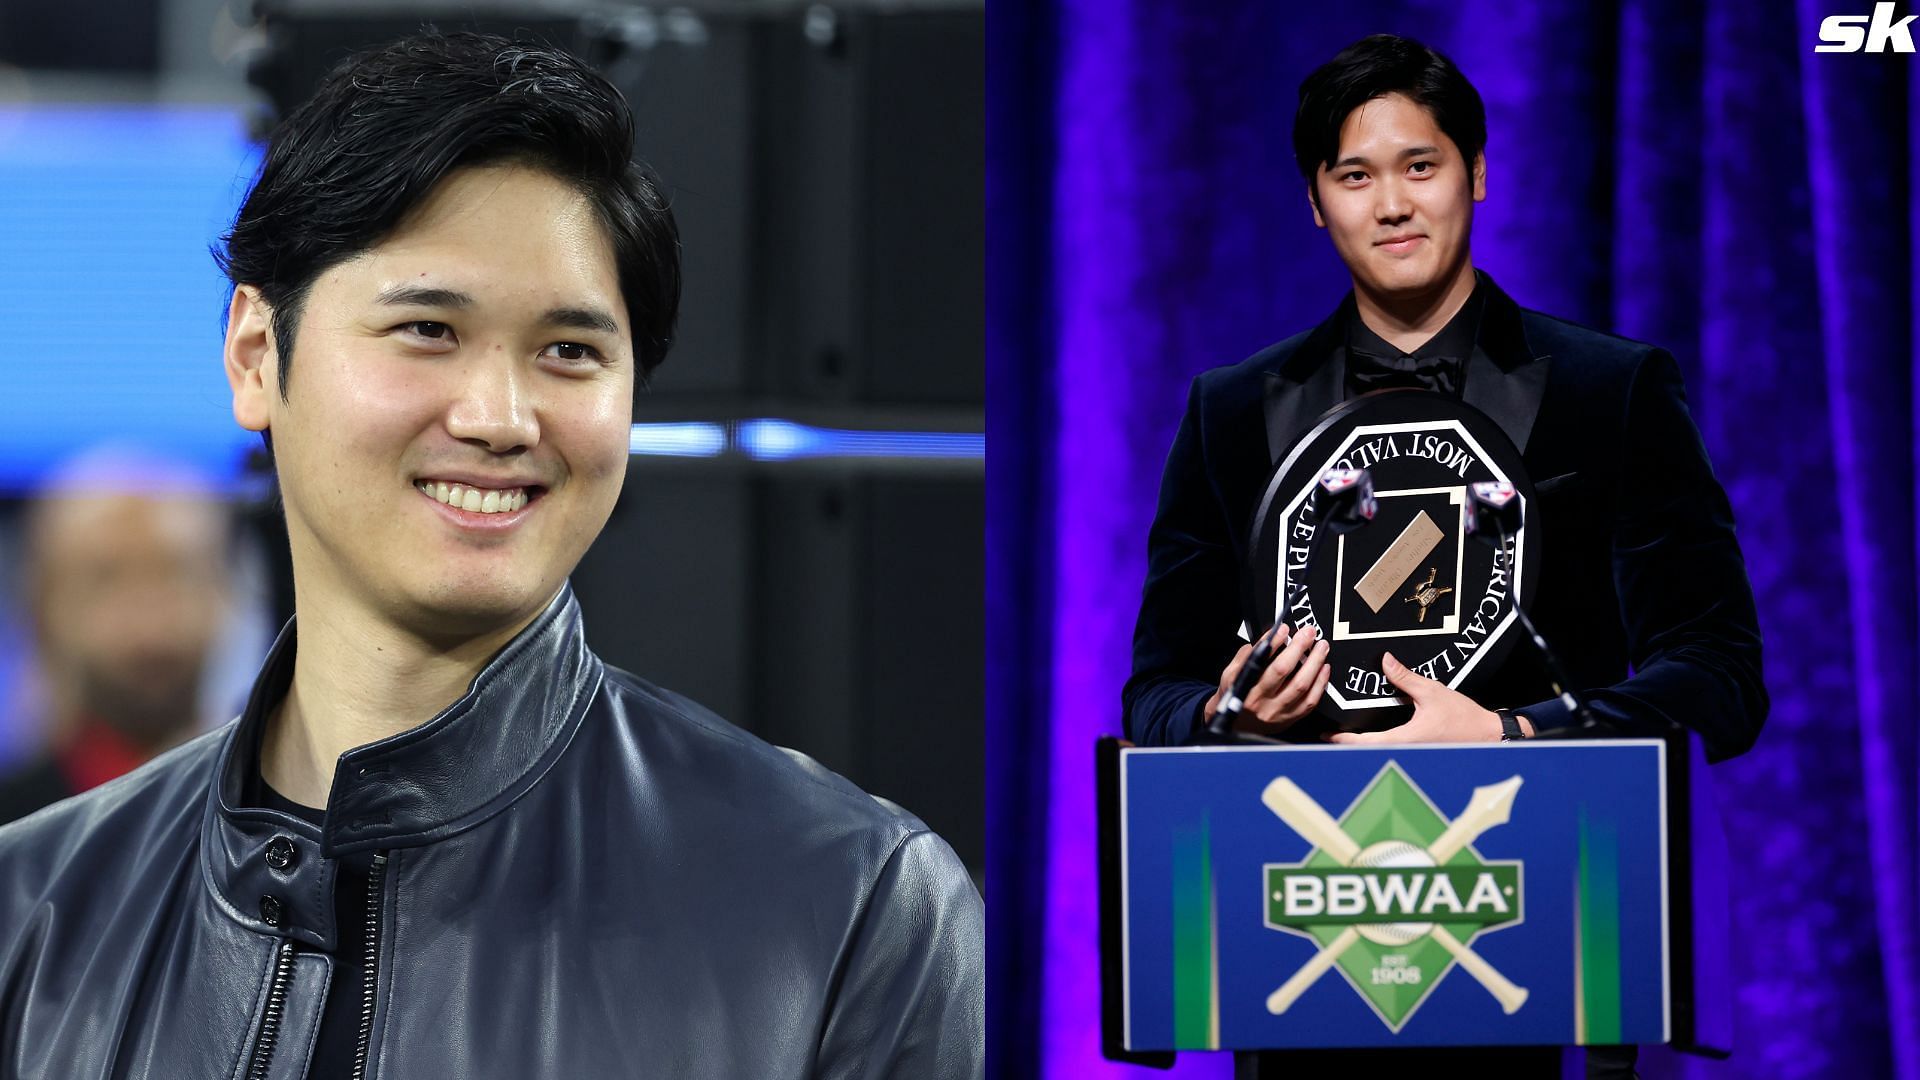 MLB player Shohei Ohtani speaks to the crowd after receiving the American League Most Valuable Player award during the 2024 BBWAA Awards Dinner at New York 